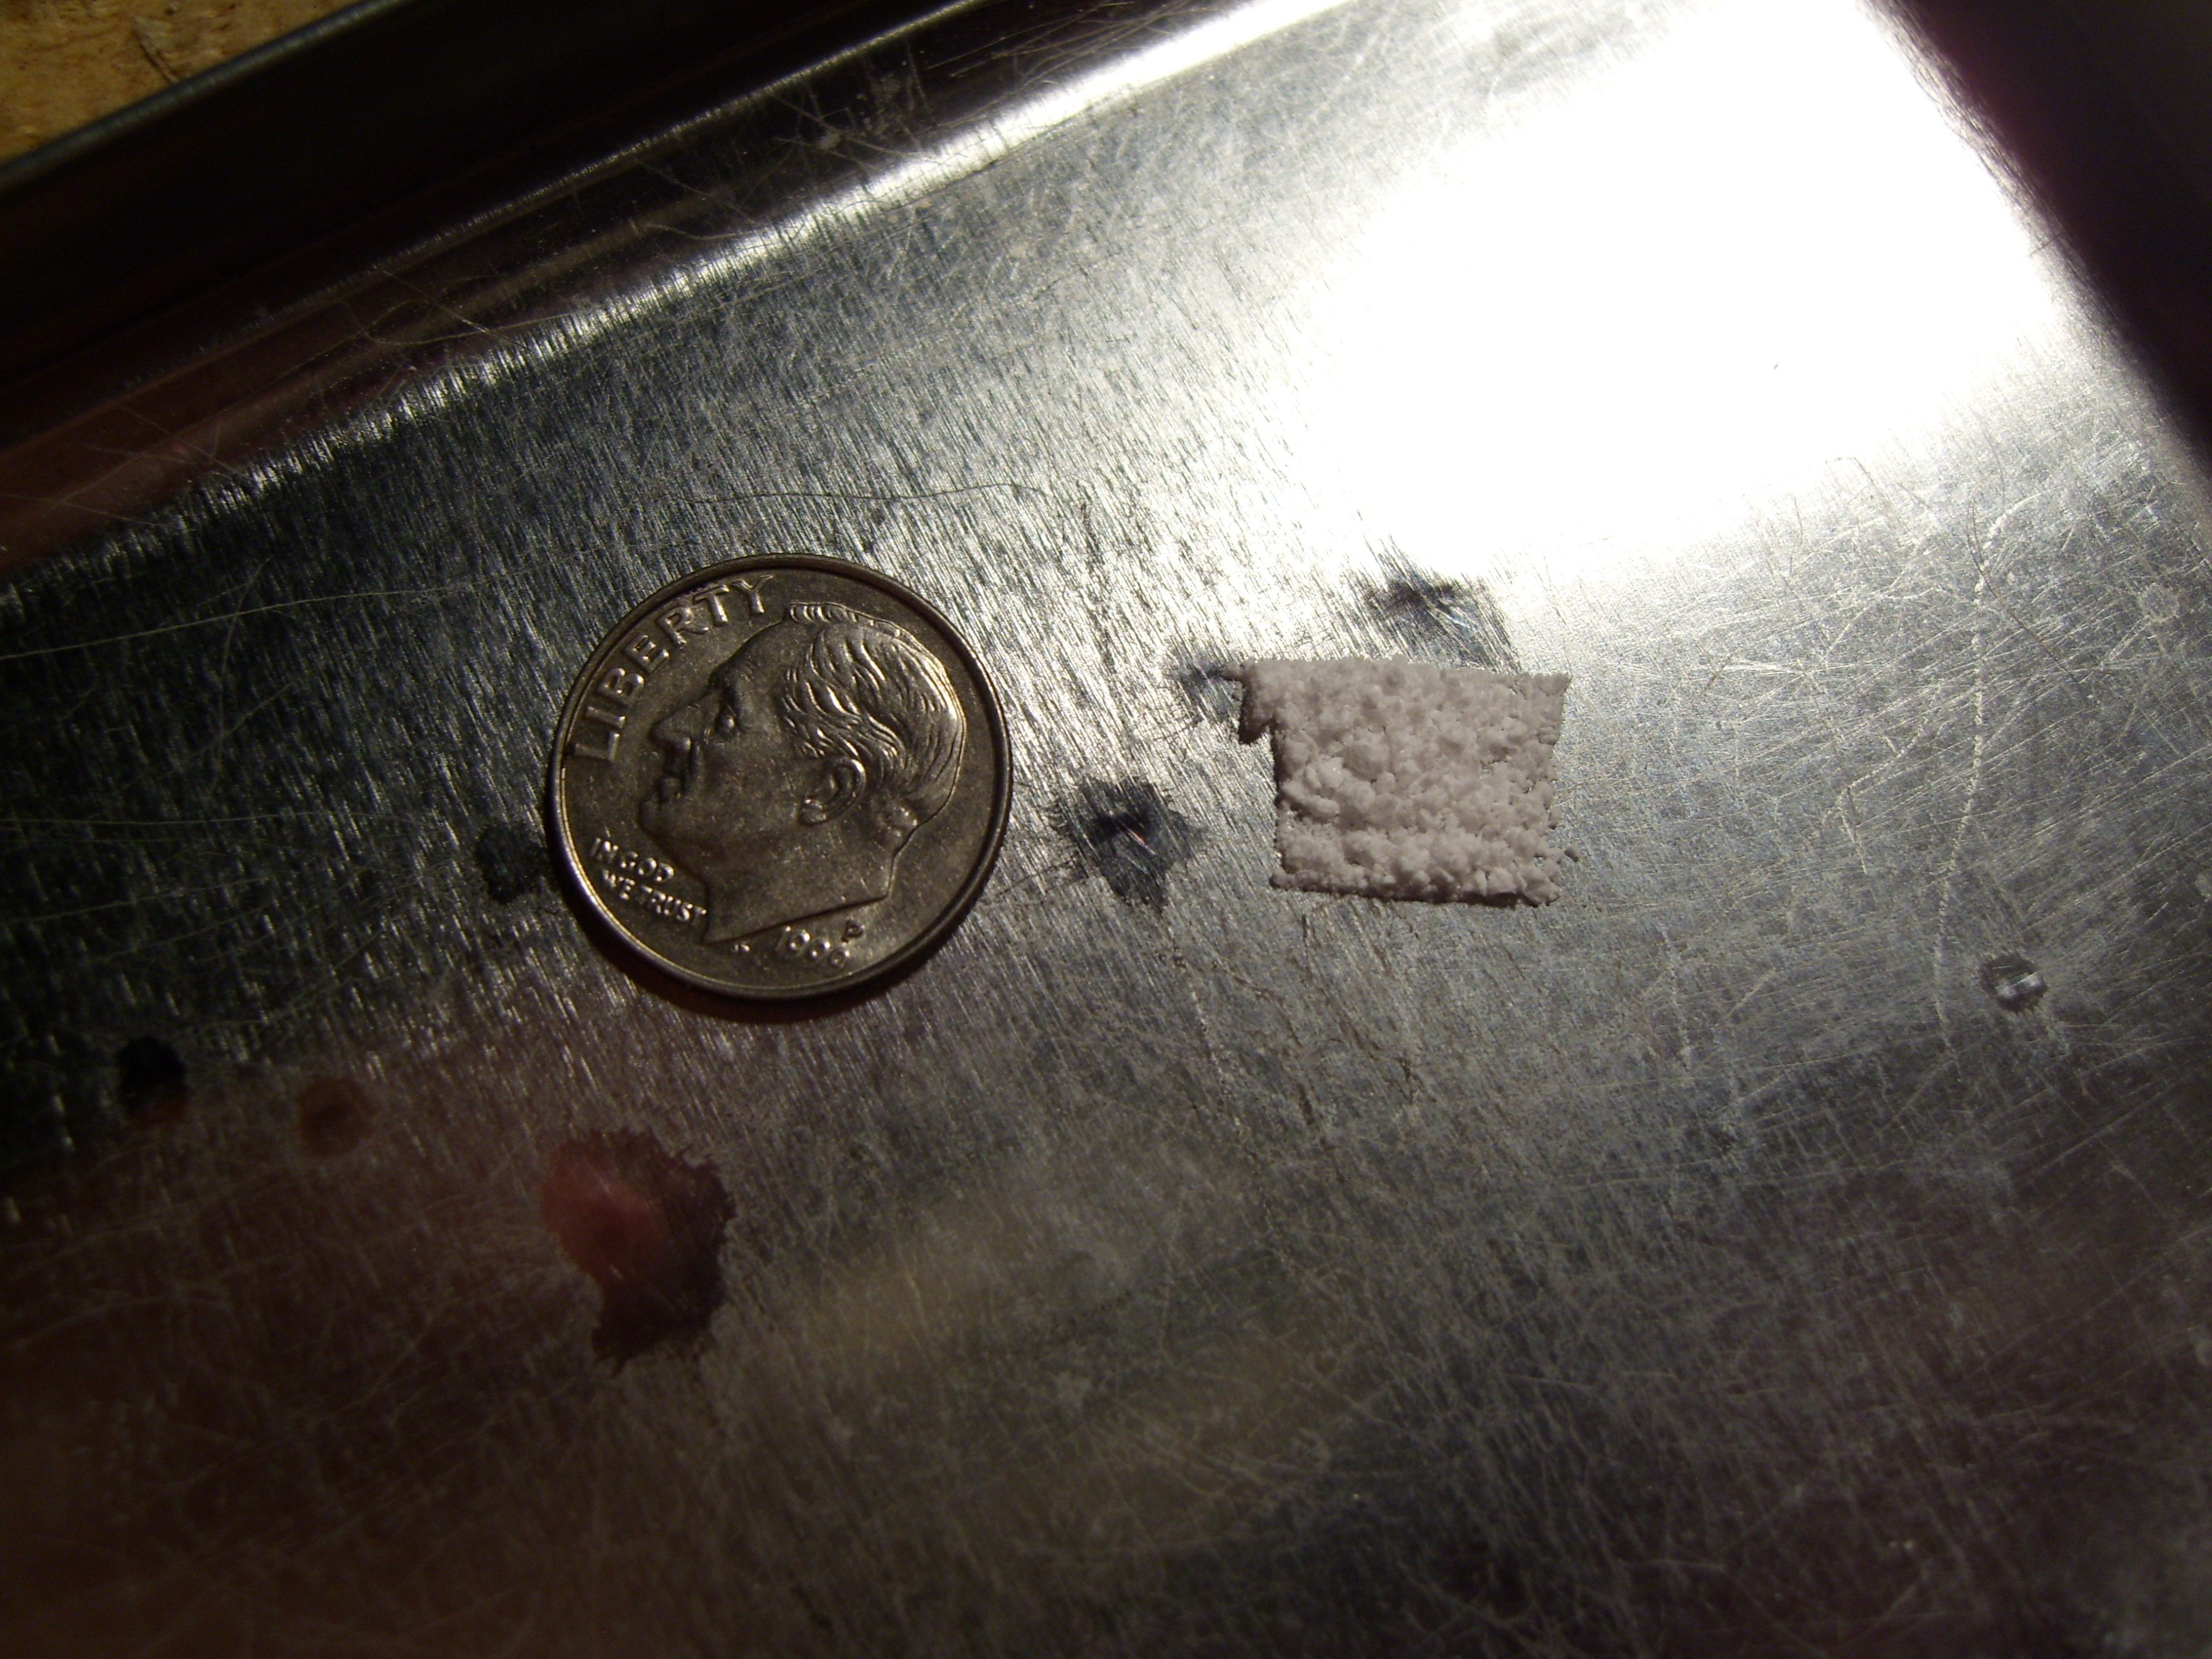 52mg of street amphetamines. US Dime for scale.